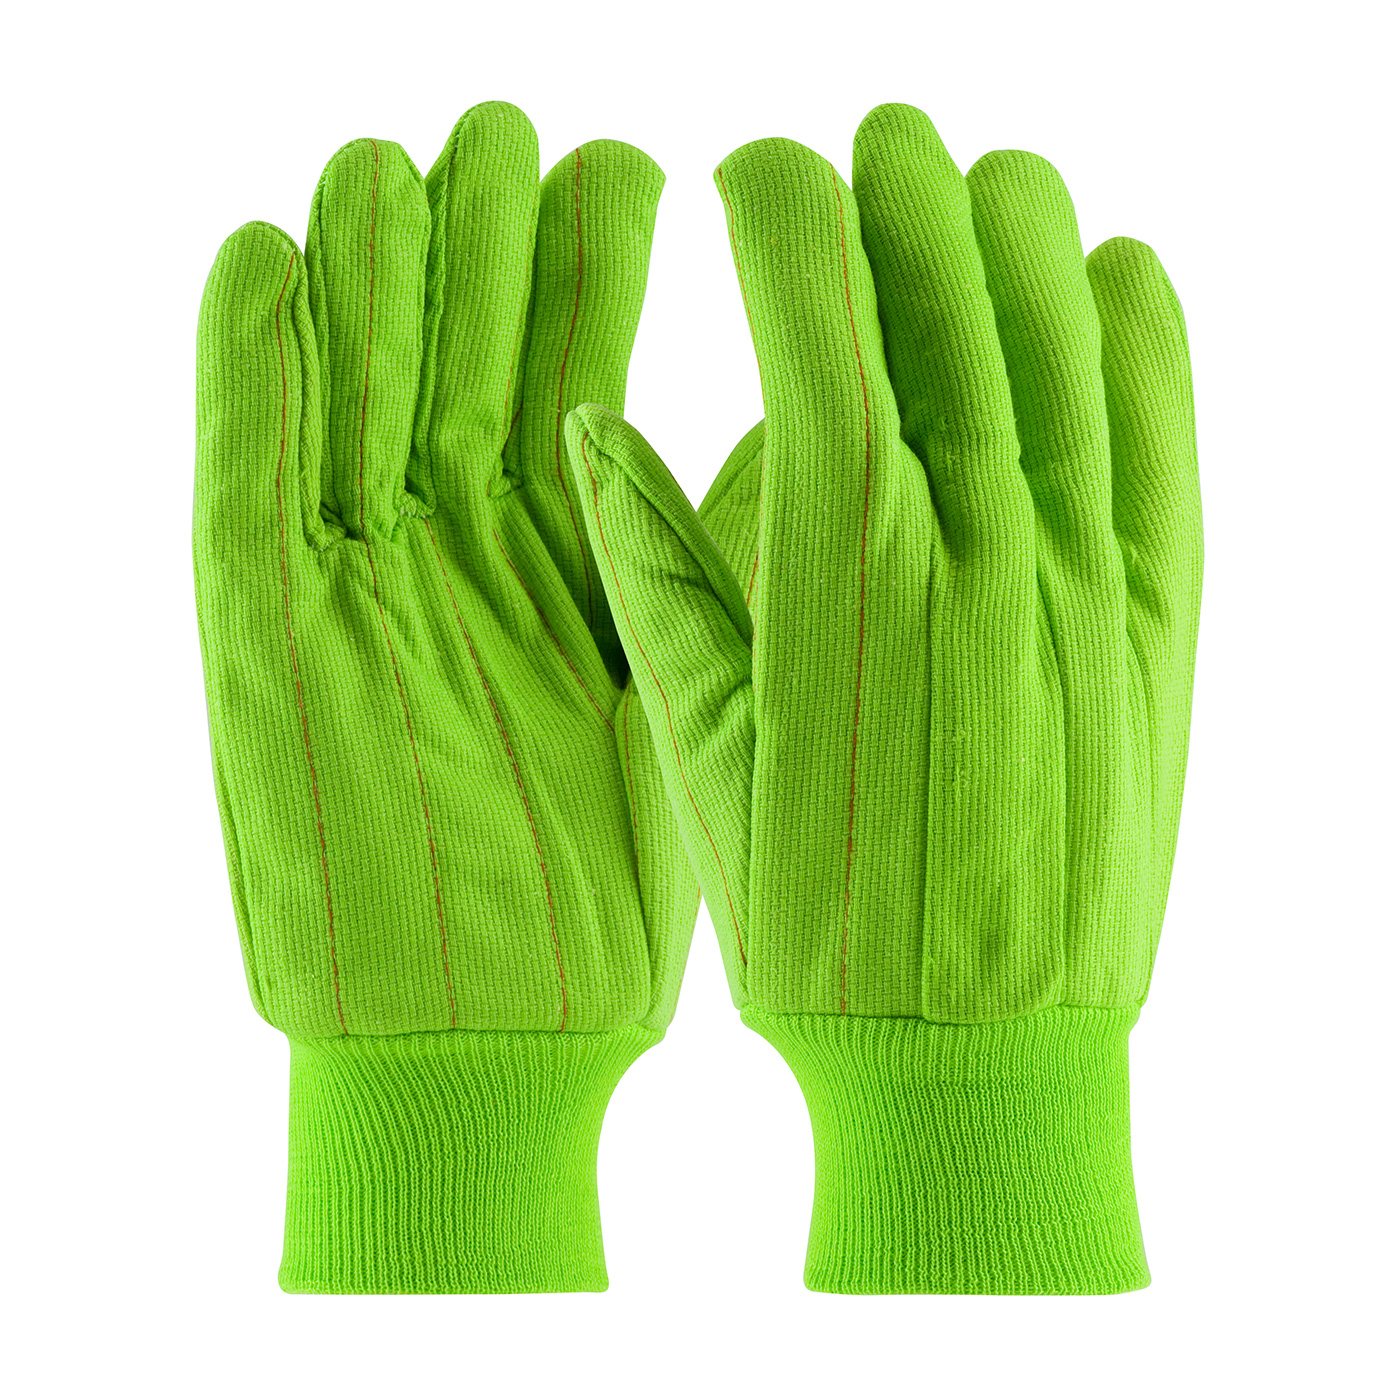 PIP Men's Hi-Vis Green 18oz. Nap-in Finish Double Palm Cotton/Polyester Canvas Gloves - Knit Wrist